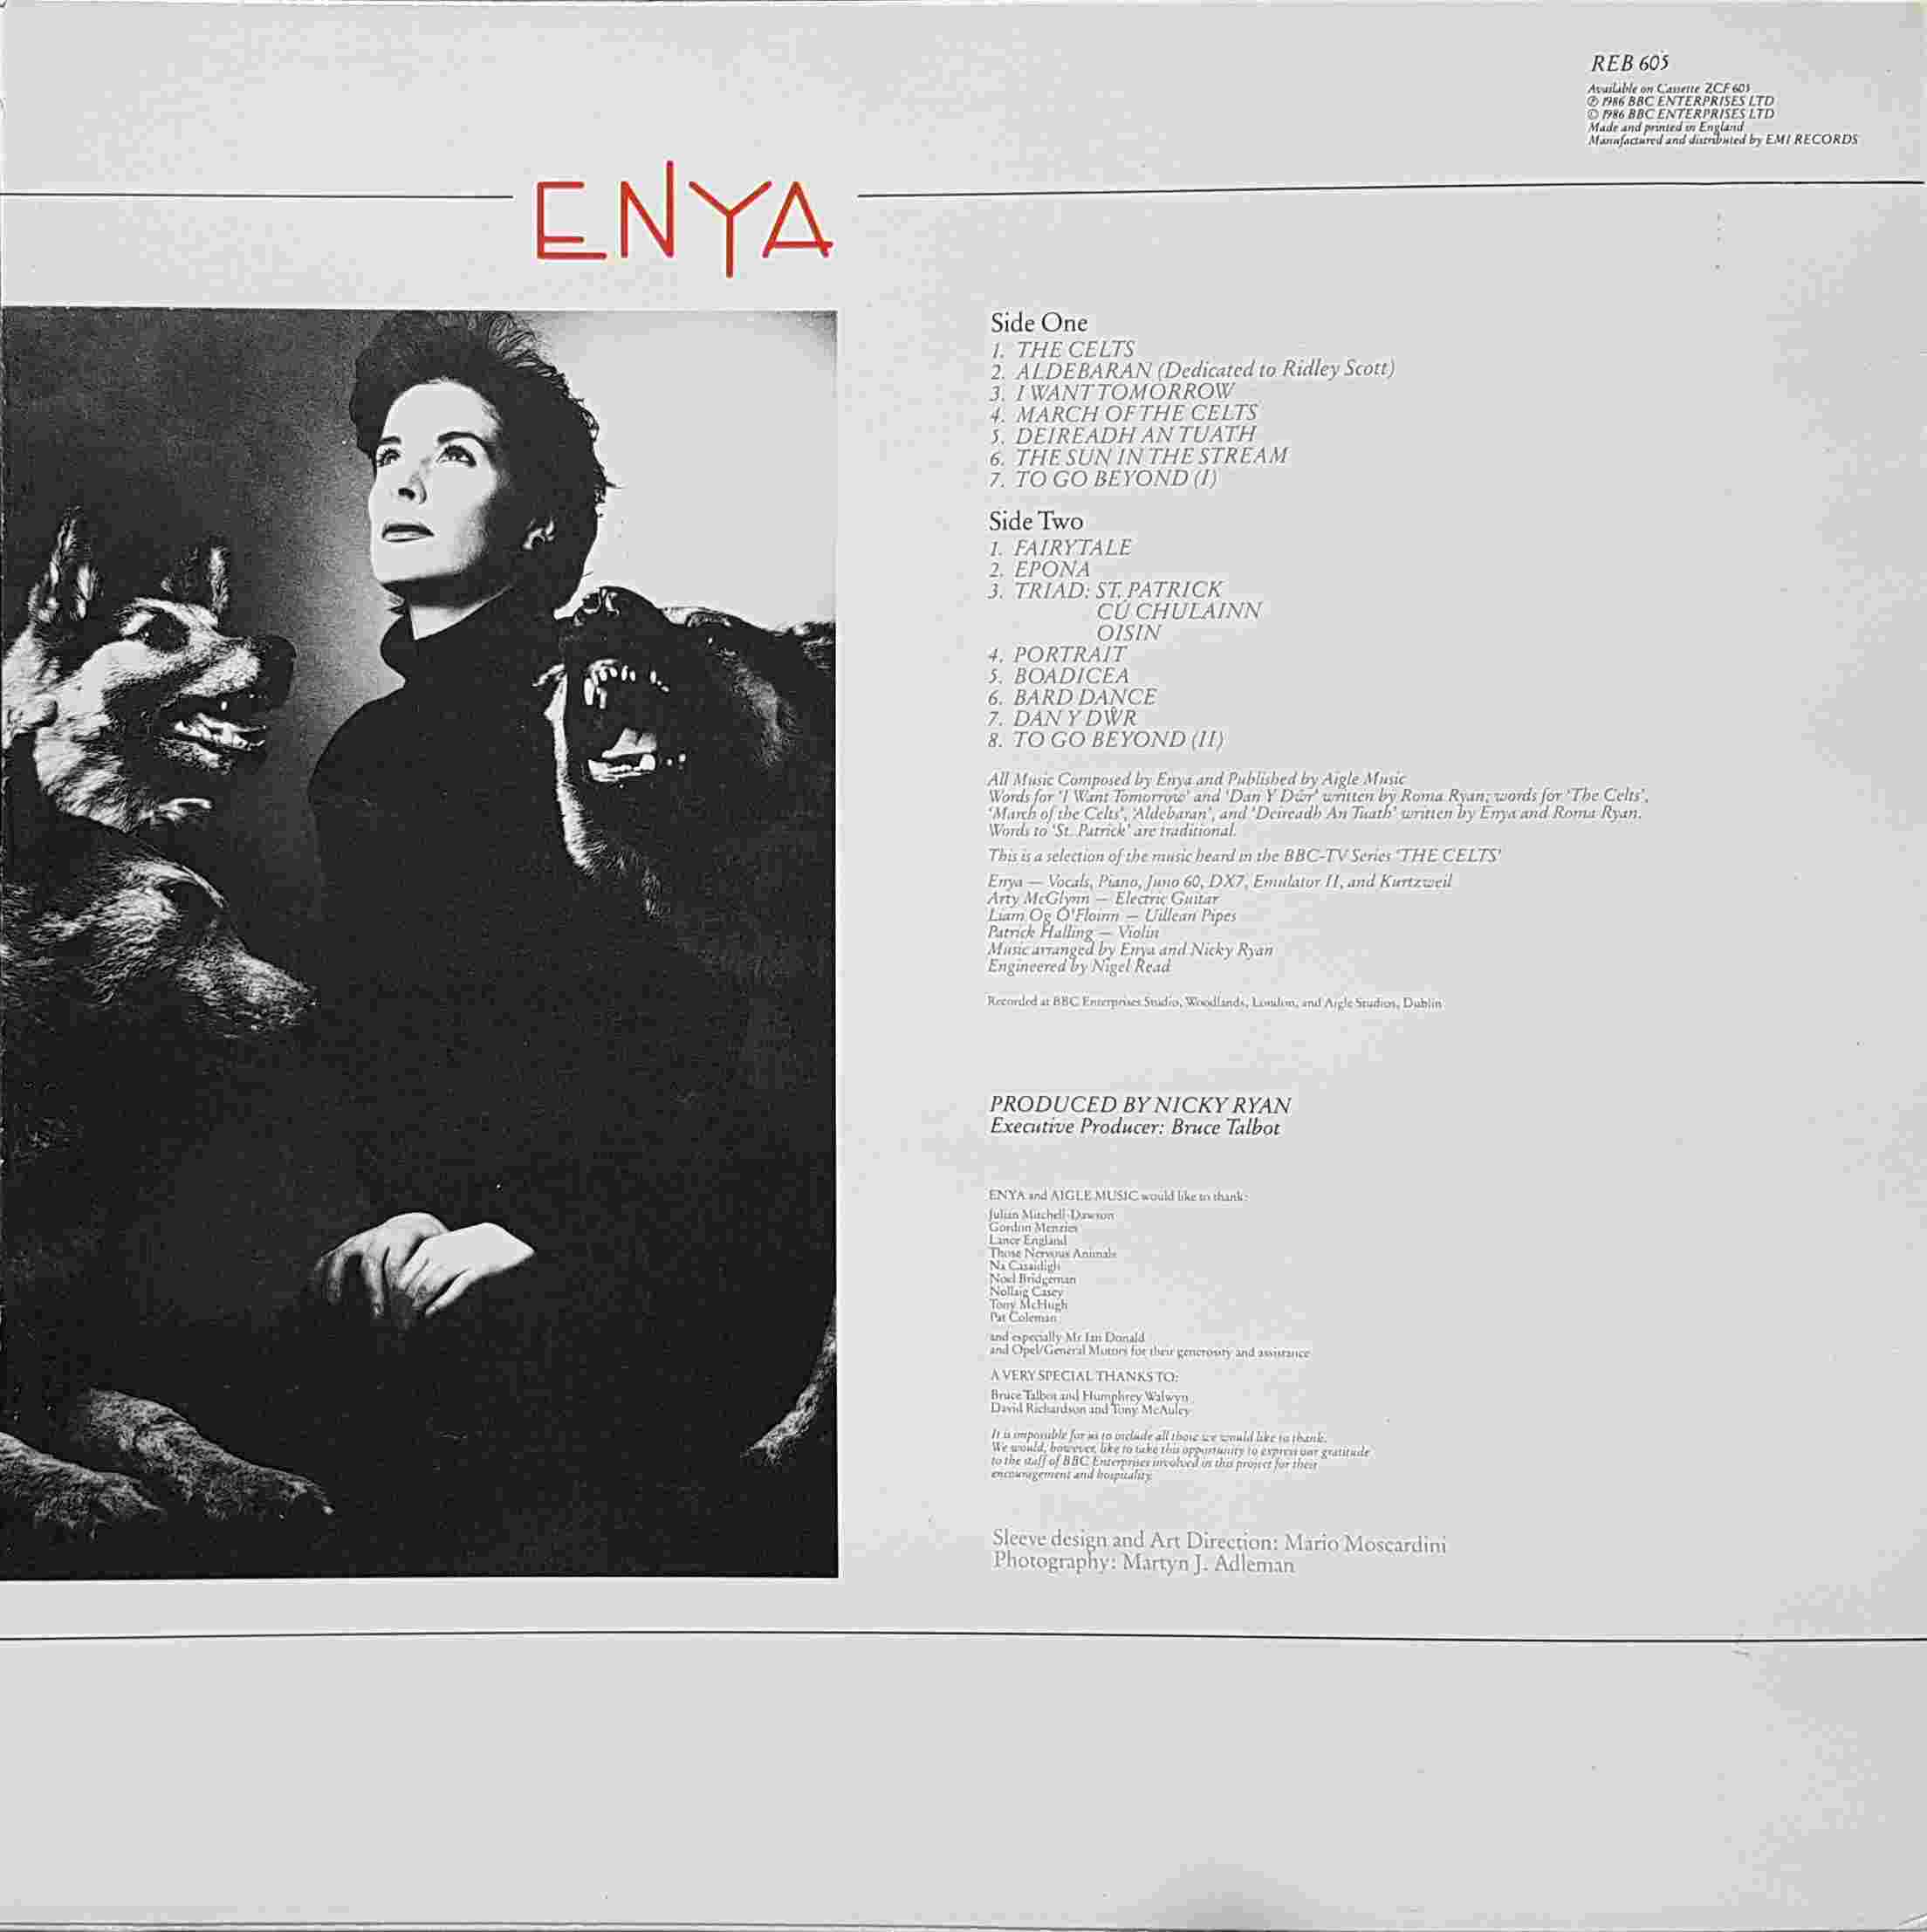 Picture of REB 605 The Celts by artist Enya from the BBC records and Tapes library